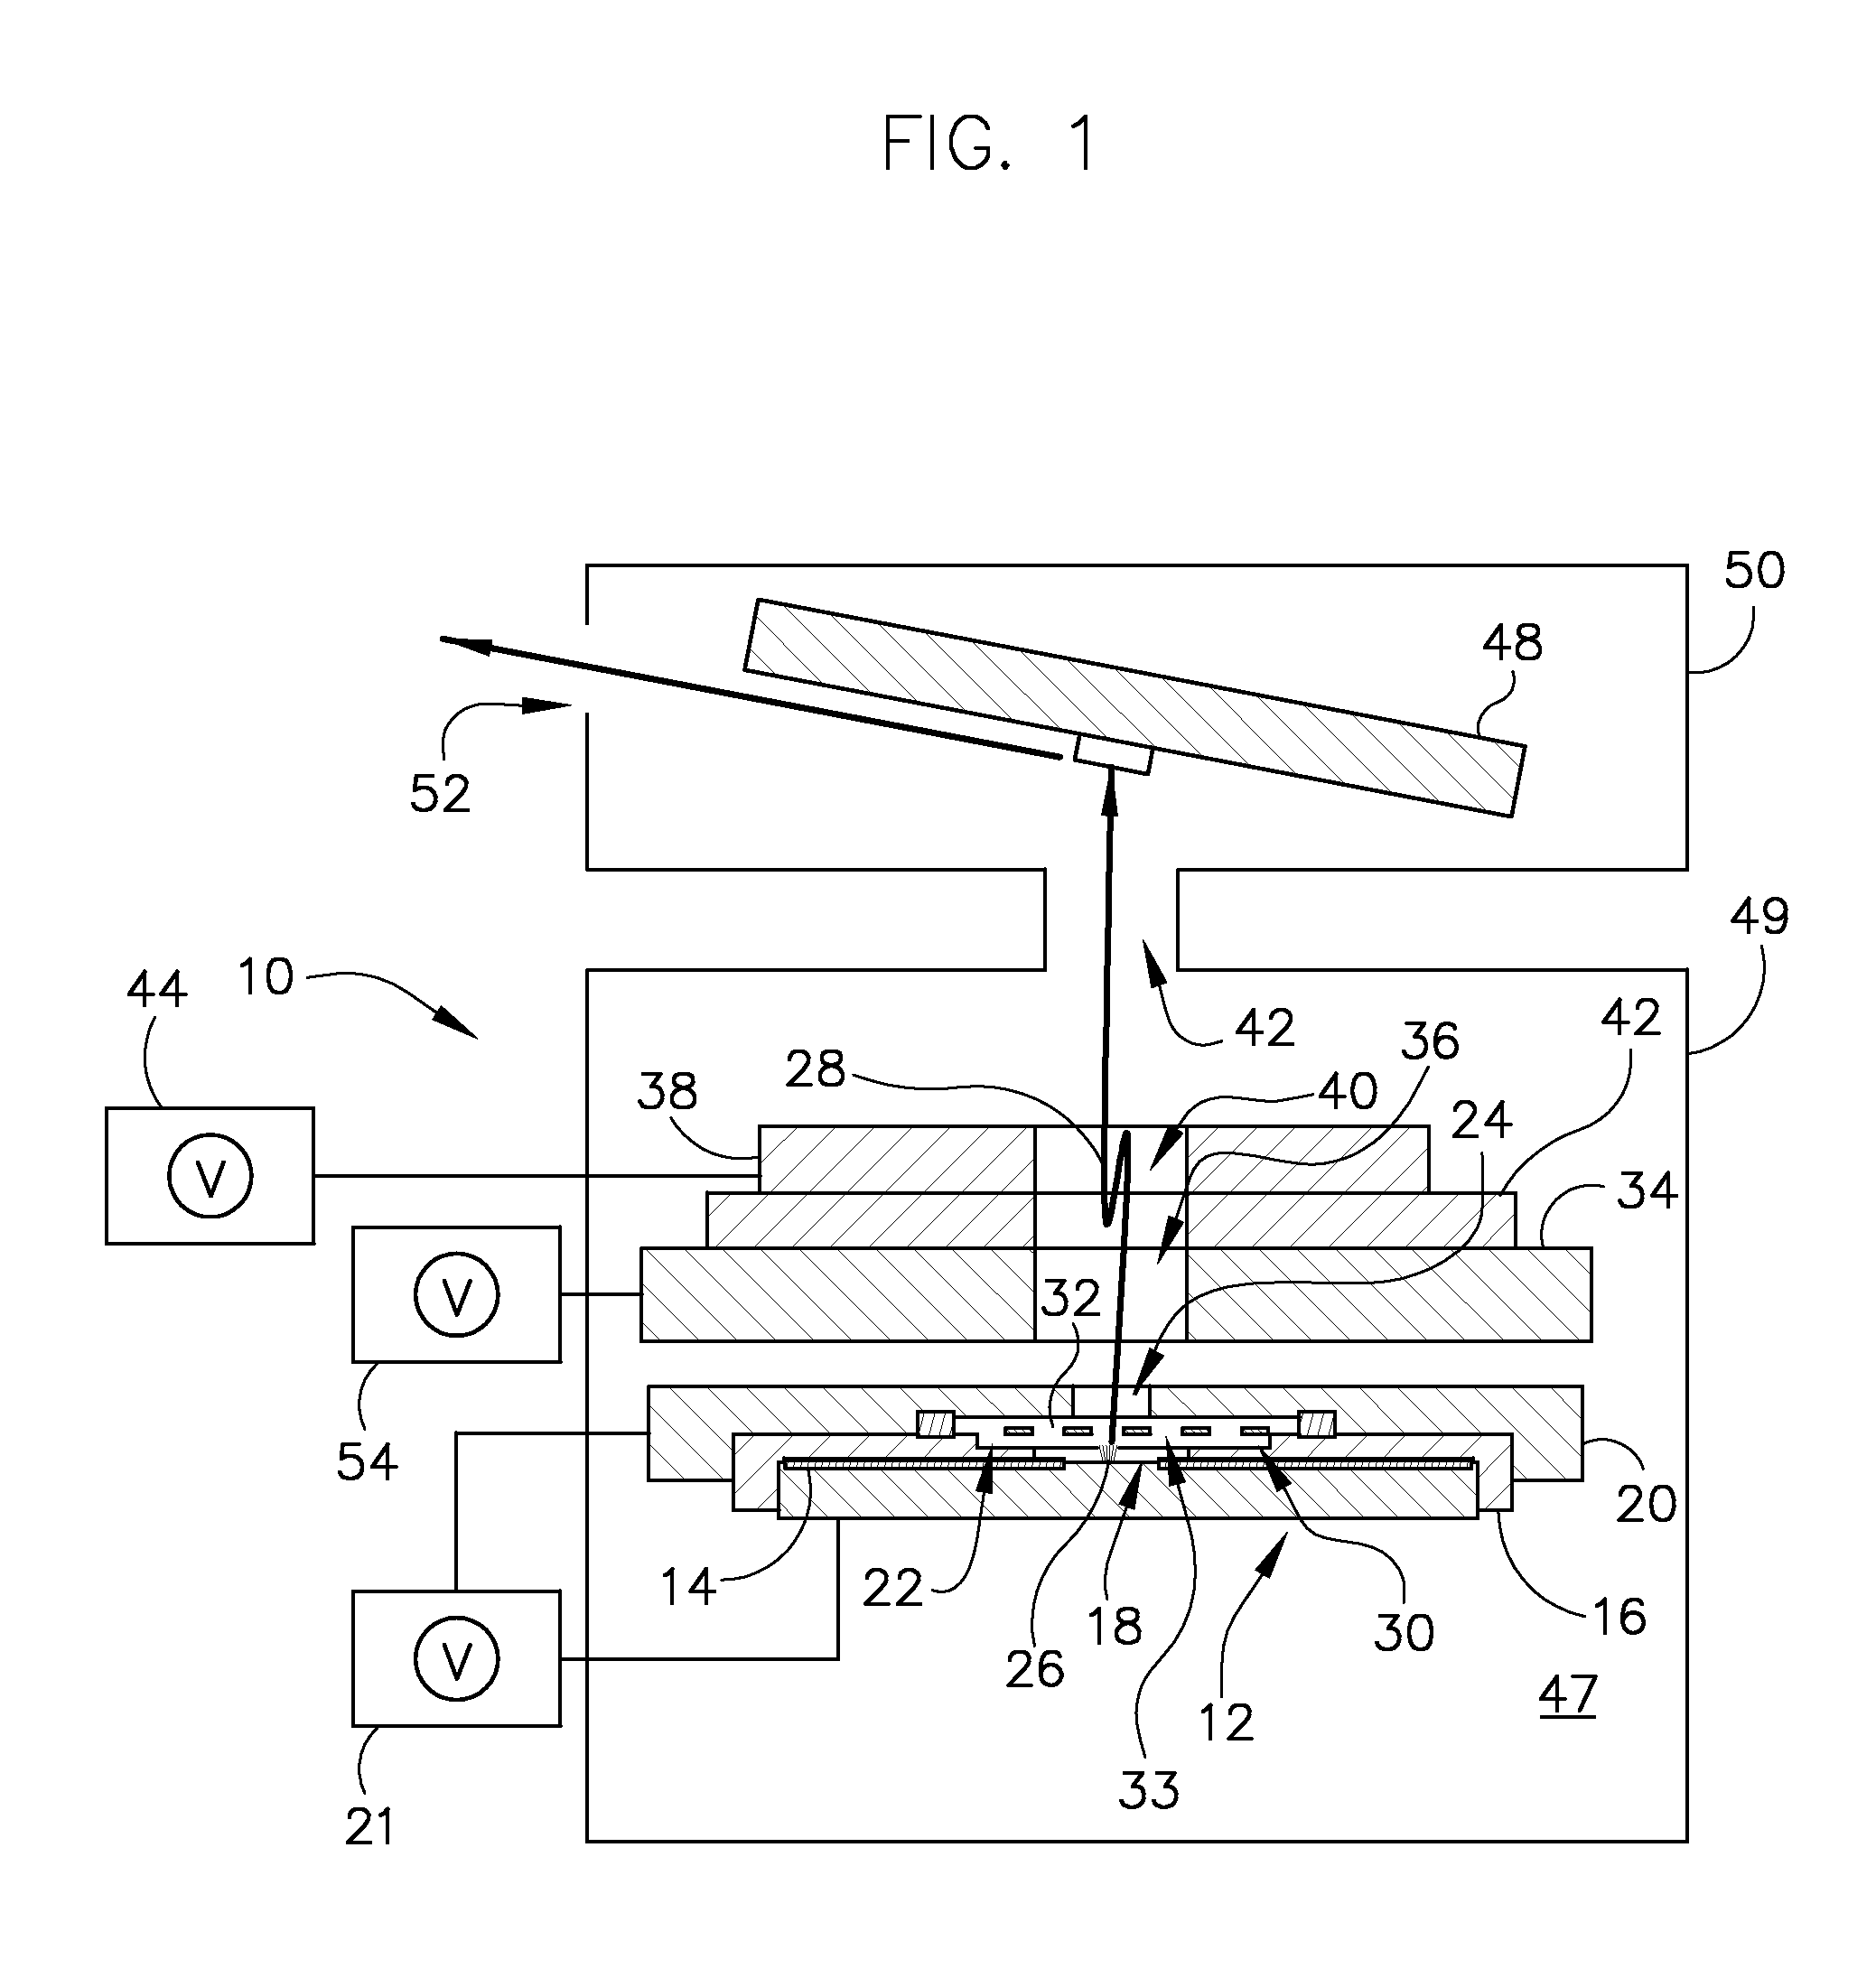 Apparatus for modifying electron beam aspect ratio for x-ray generation